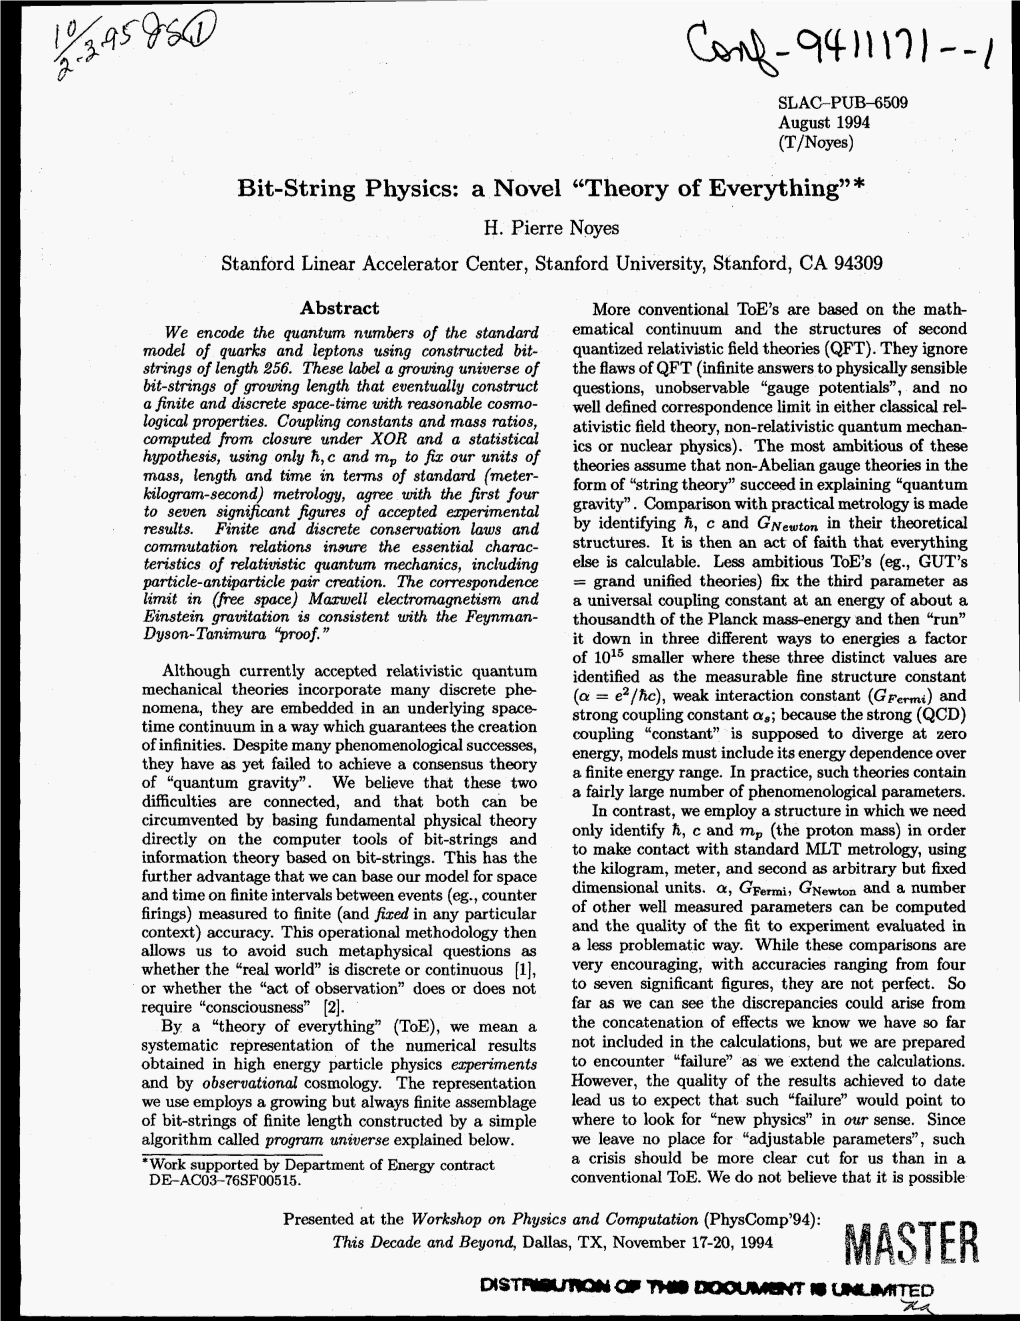 Bit-String Physics: a Novel “Theory of Everything”'